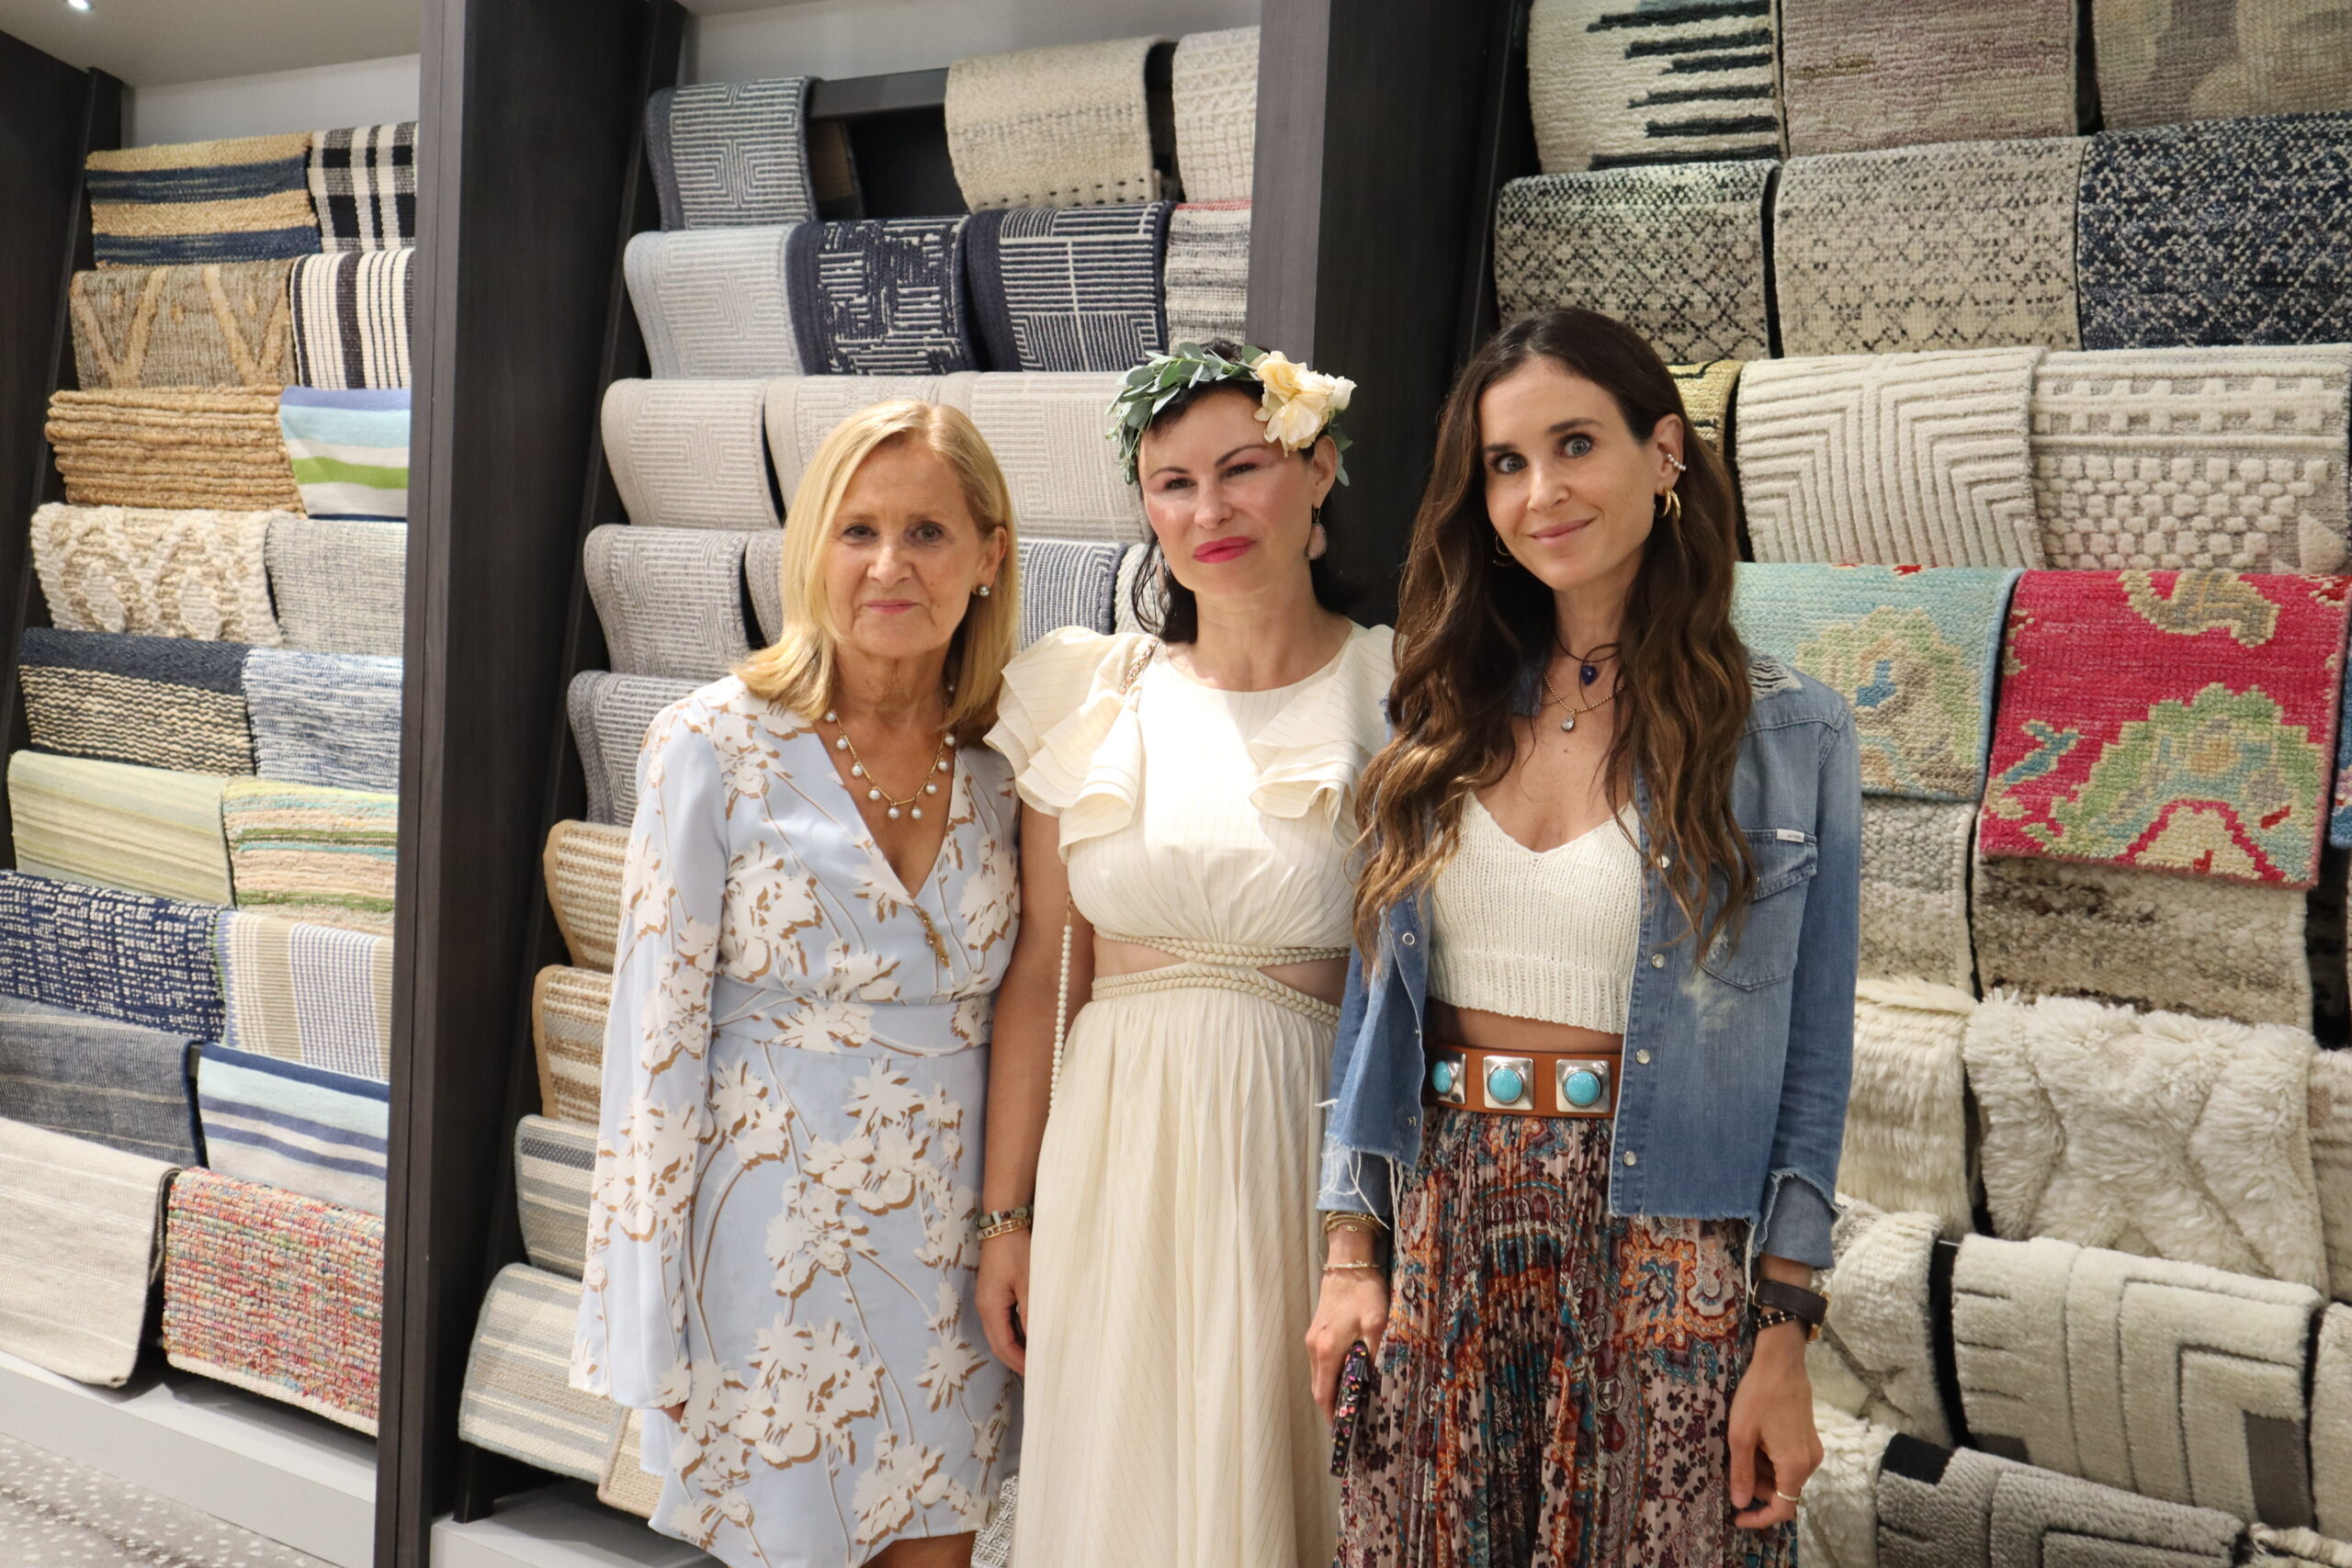 From left, Hilary Cosgriff, designer of Hampton Fabric and Blinds, Elsa Soyars, designer of Elsa Soyars Interiors, and Ashley Stark, the creative director of Stark stand in front of the Stark Collection. MEGAN NAFTALI